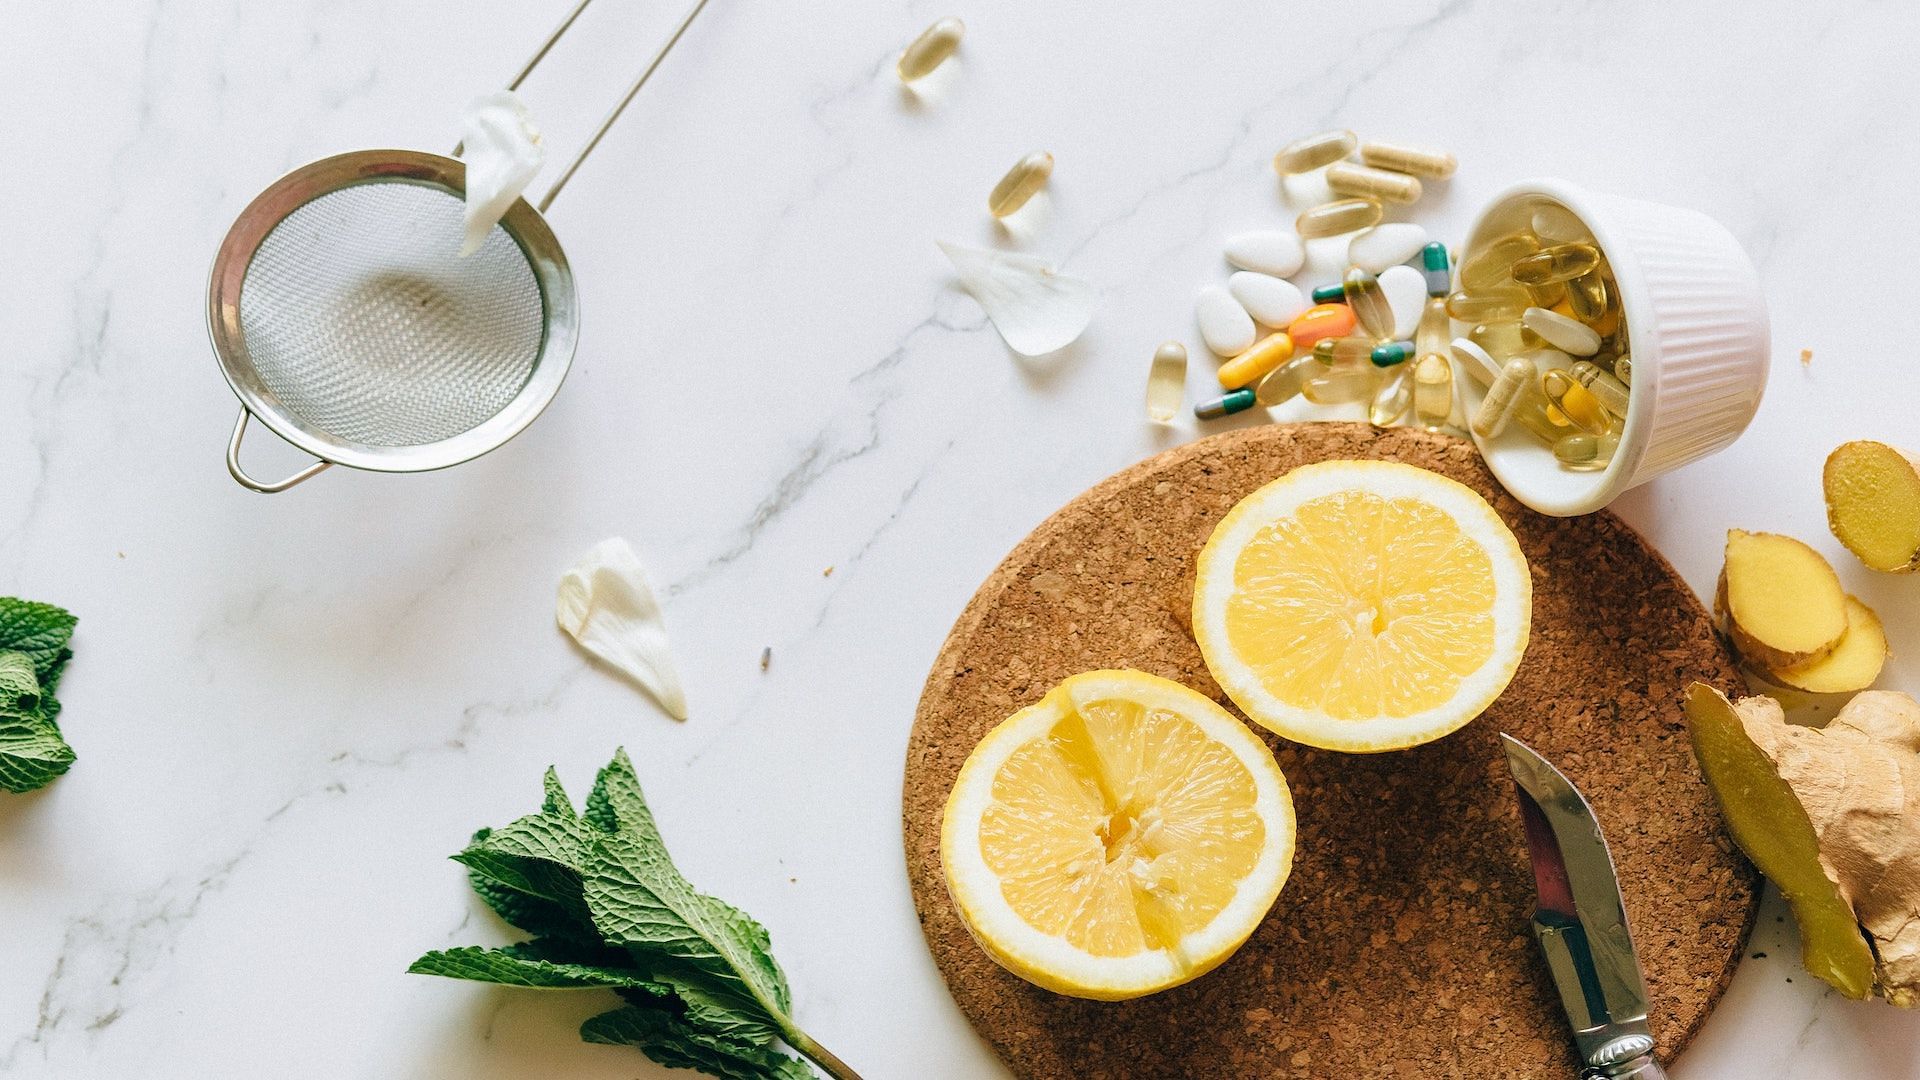 Supplements are also comprised of natural ingredients. Image via Pexels/Nataliya Vaitkevich